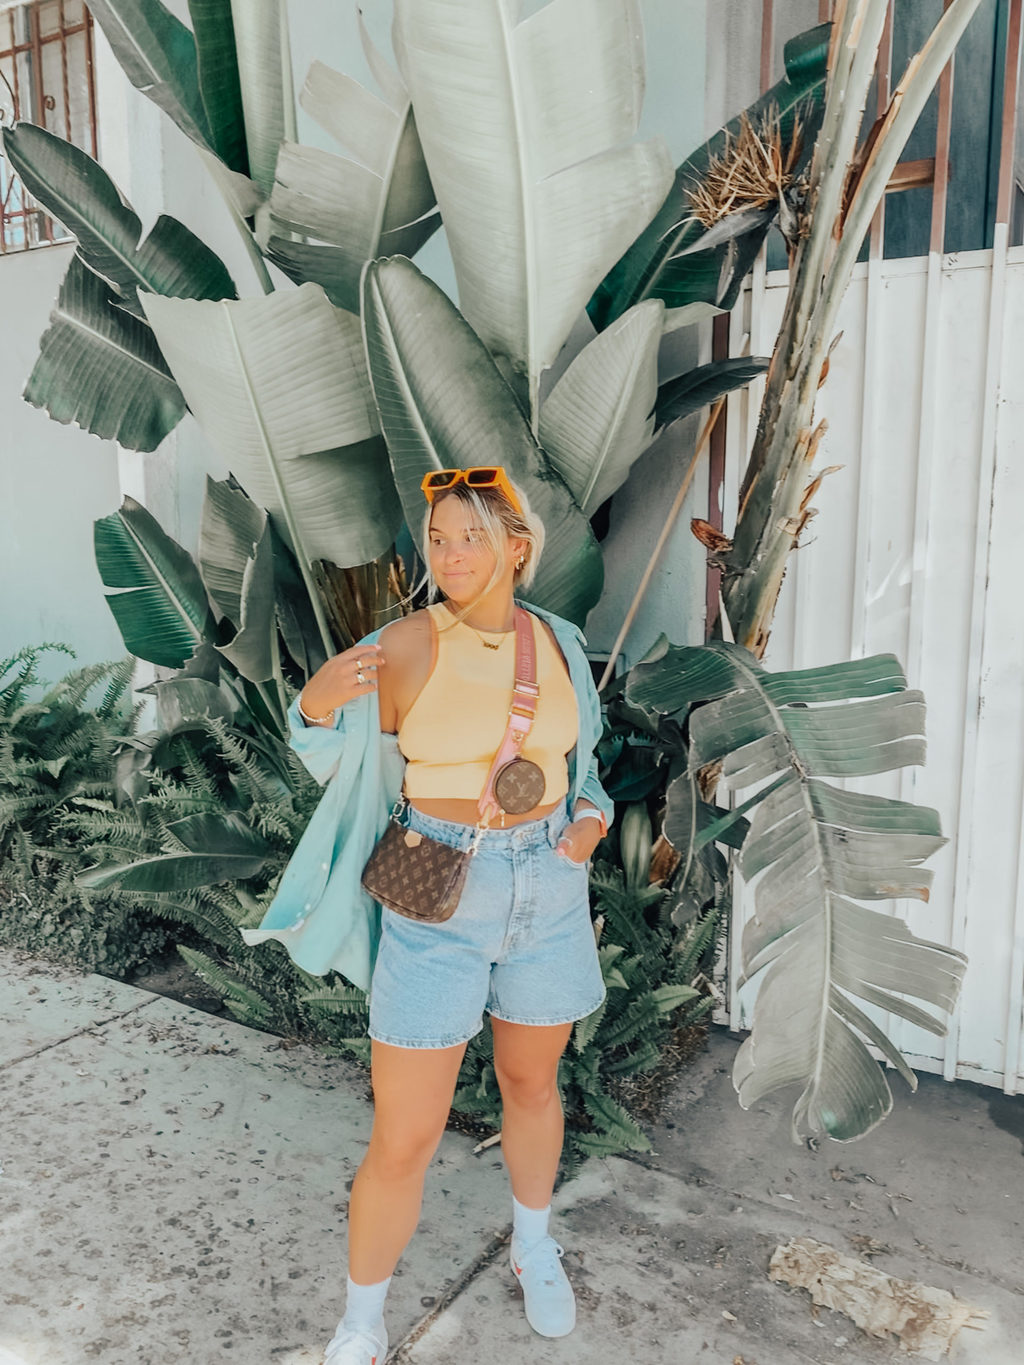 10 City Girl Outfits Inspired by US Travel Destinations - College